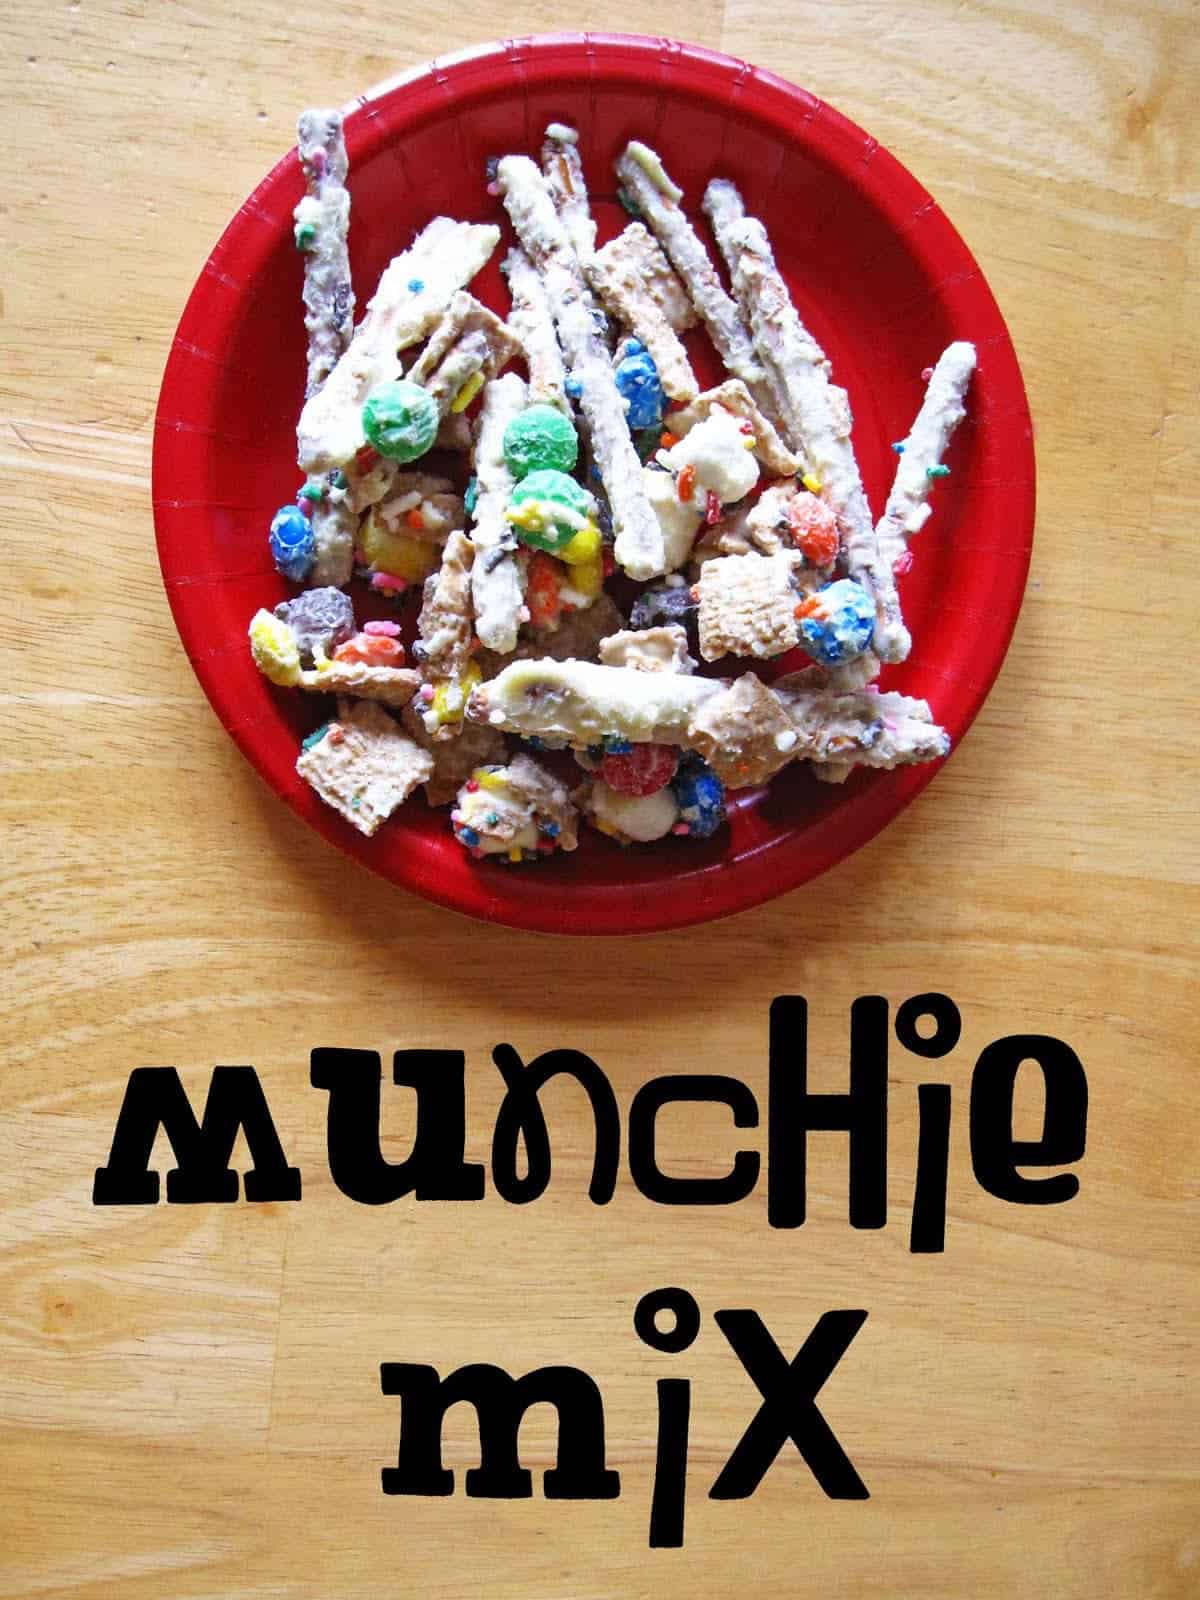 Overhead view of Munchie Mix on a red plate